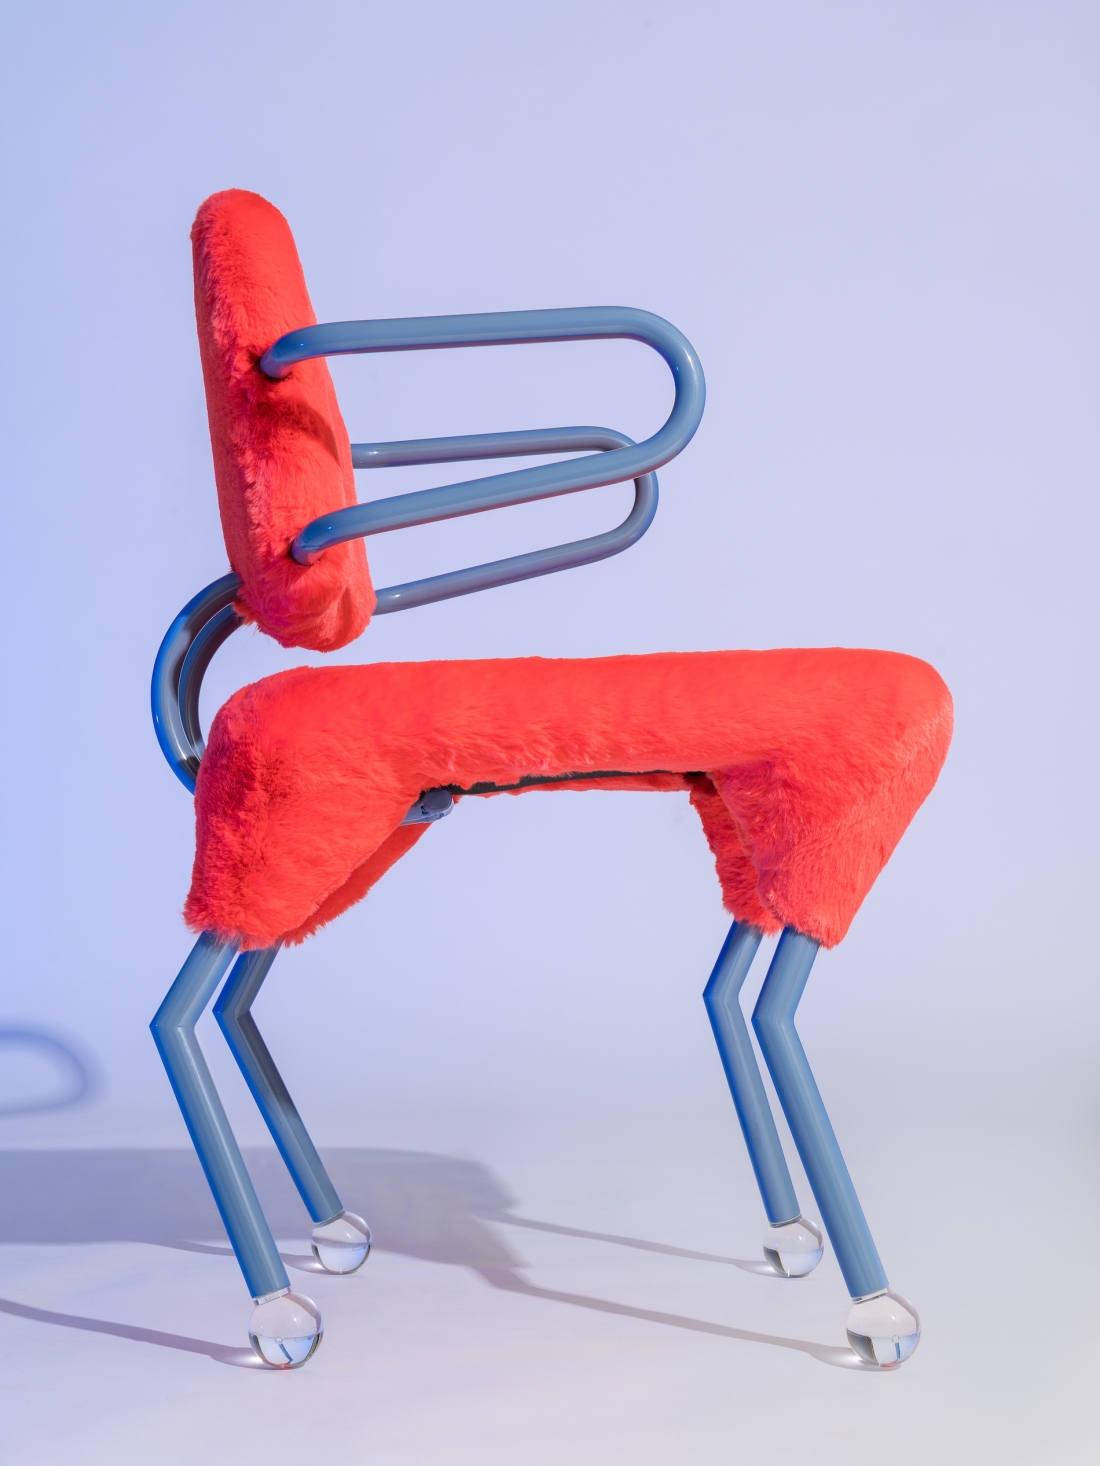 Animal Chair, Masanori Umeda, 2020 (based on a 1982 design), limited edition of 24 items + 2 artist's proof, “Night Tales” Collection, Post Design. Small armchair with metal and synthetic fabric seat and round plexiglass feet. Dimensions: W 50, D 53, H 80 cm. Photograph © Delfino Sisto Legnani. Courtesy of Memphis srl. 